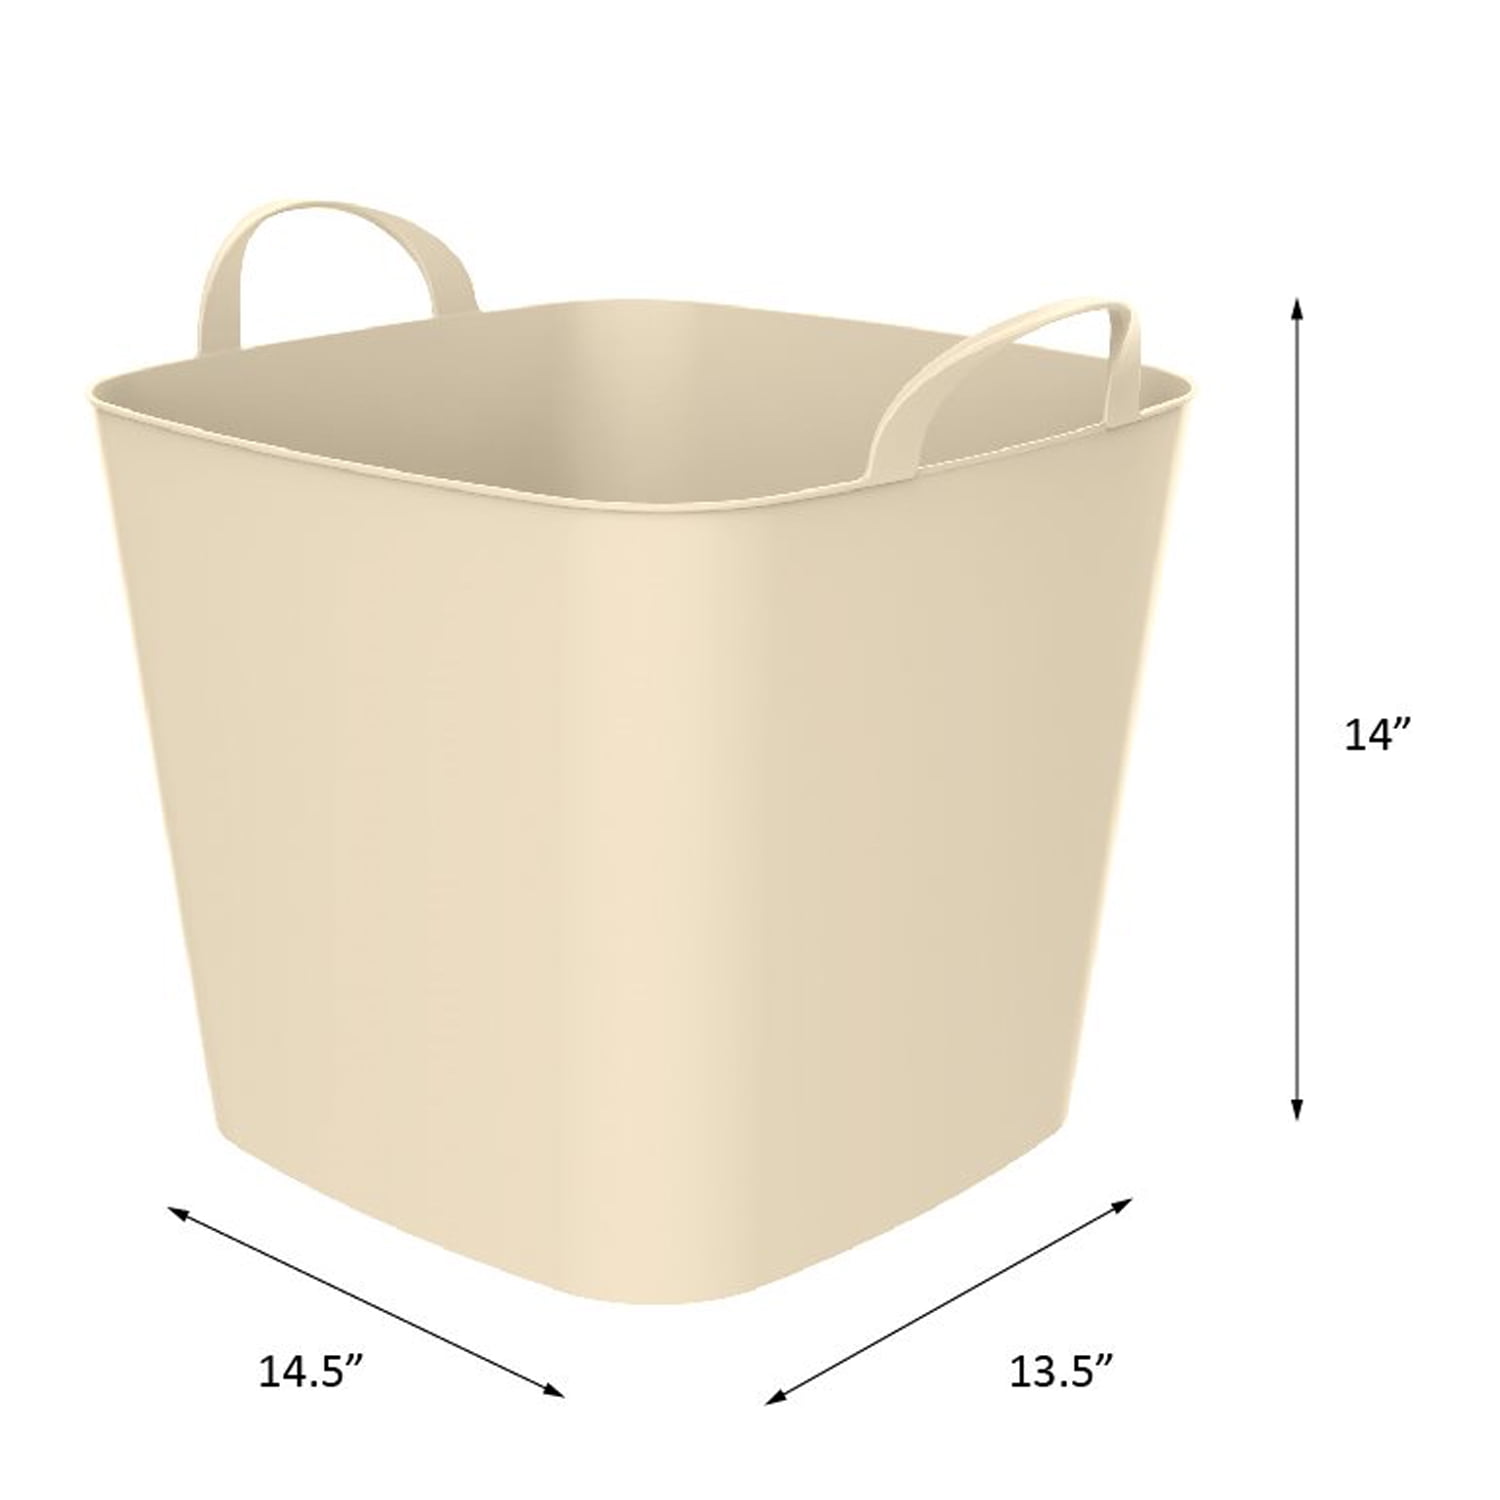 40L Flexible Tub Bucket with Carry Handles Home Garden Storage